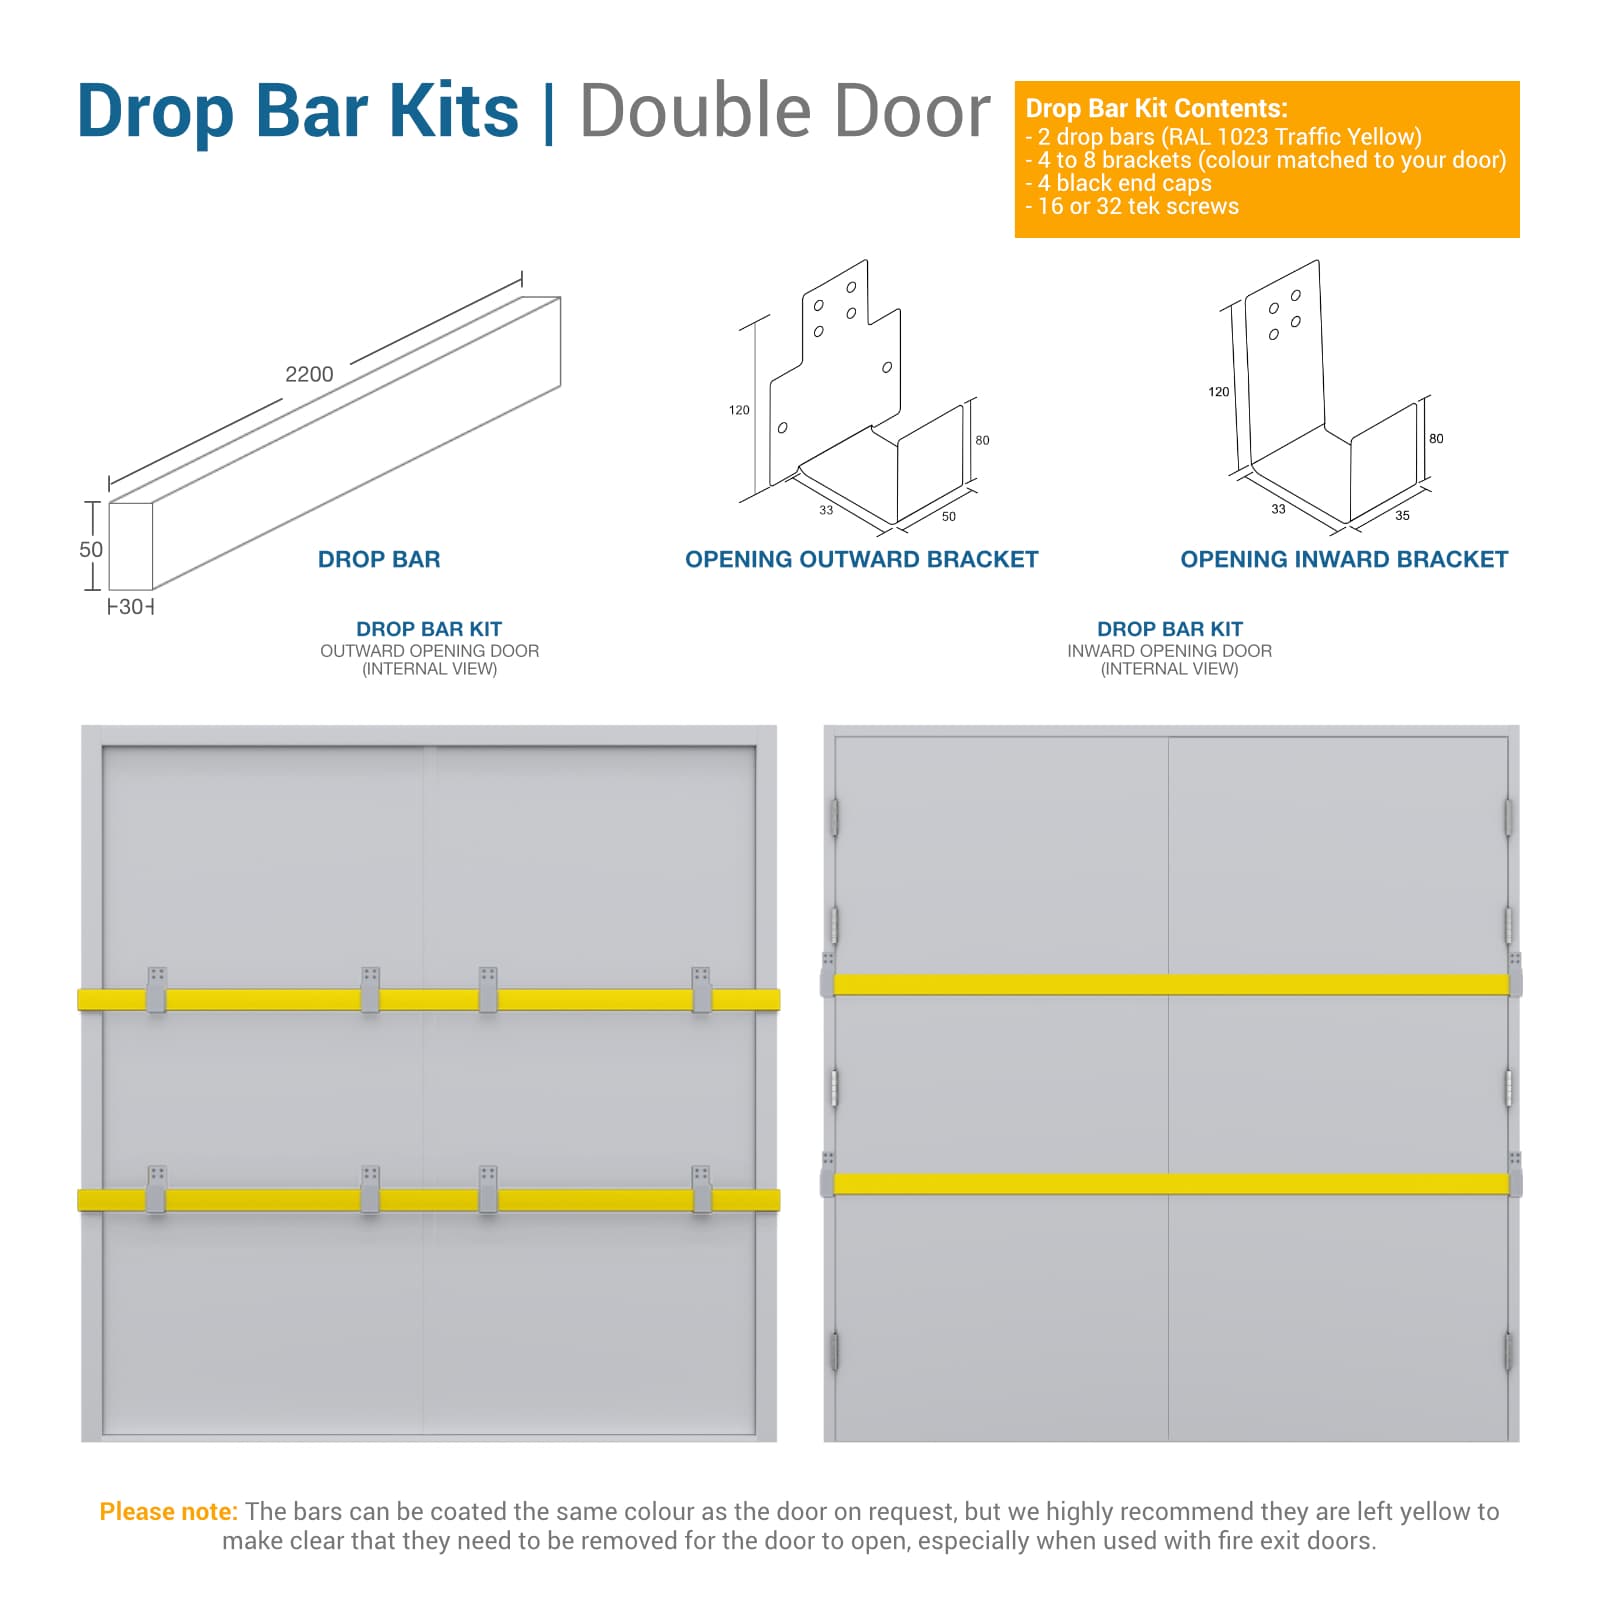 Image showing the contents of a double steel door drop bar kit